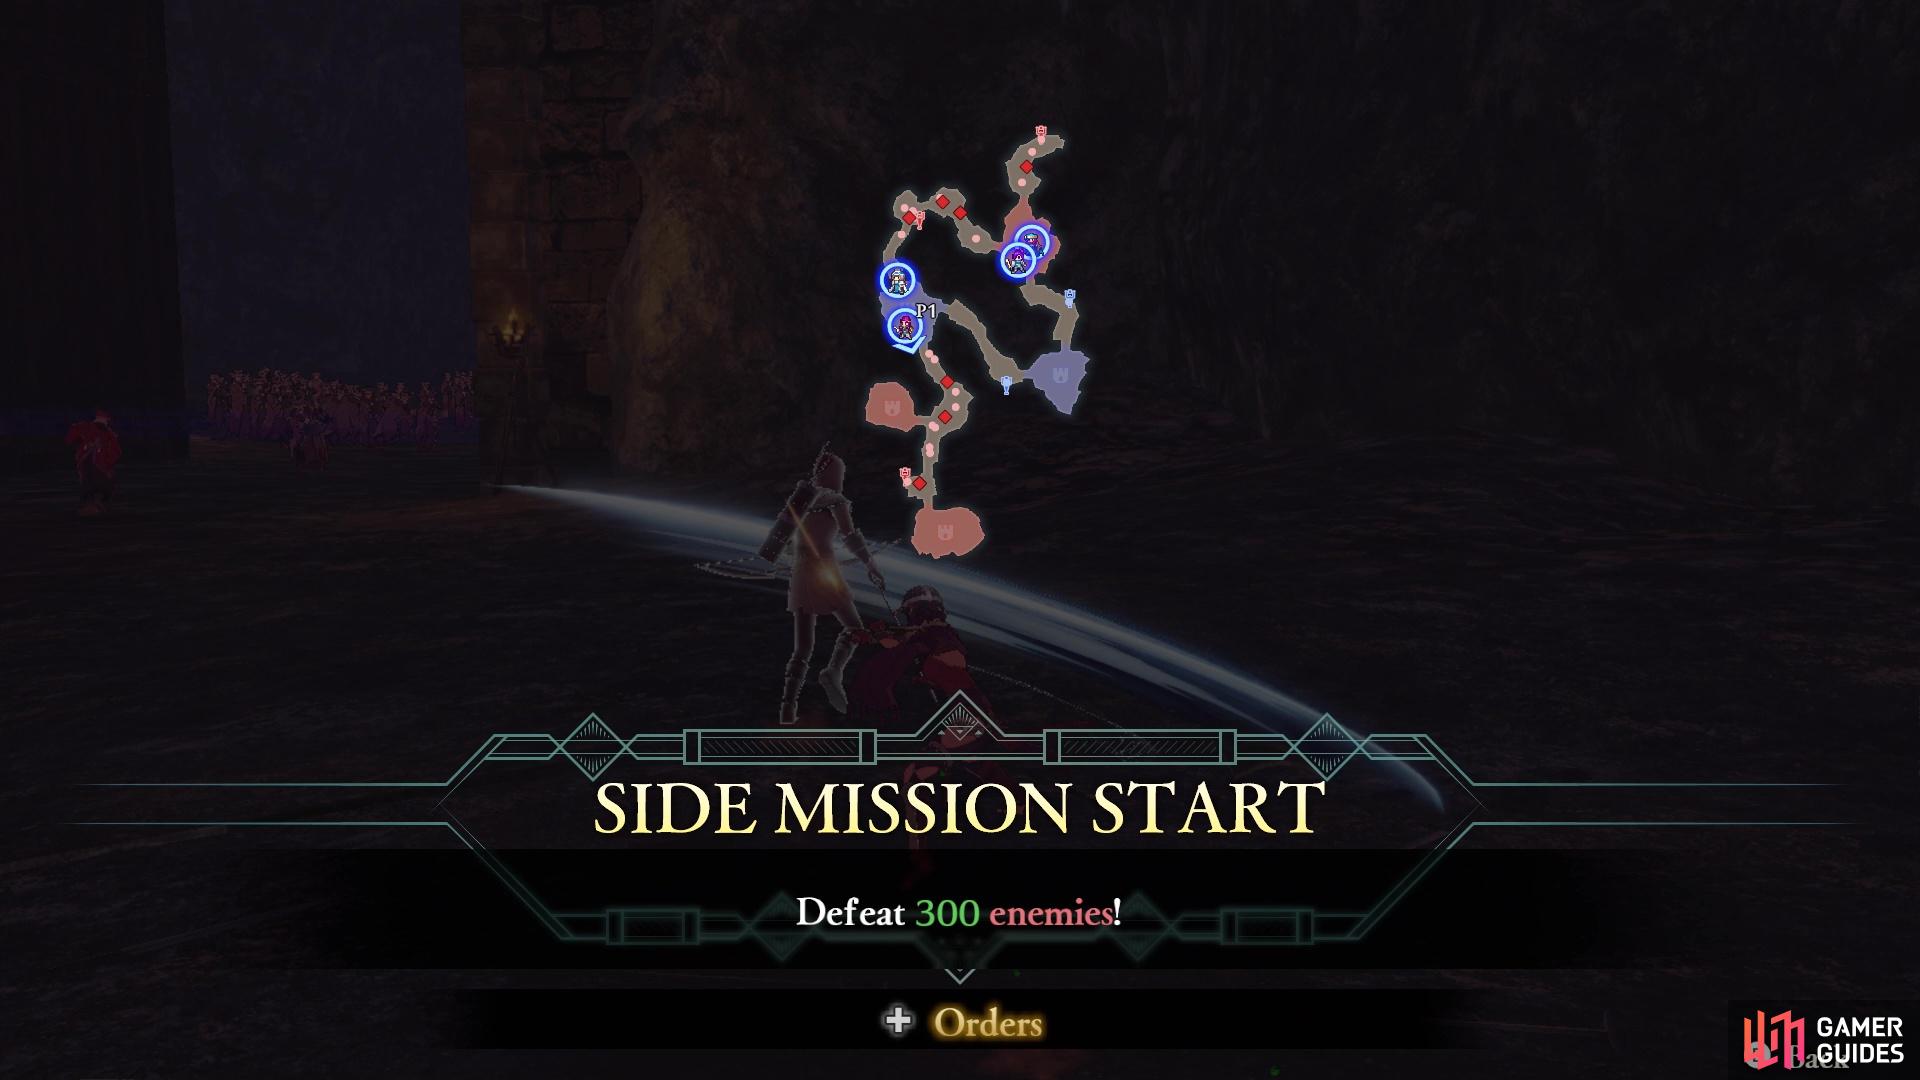 The side mission requires you to defeat 300 enemies